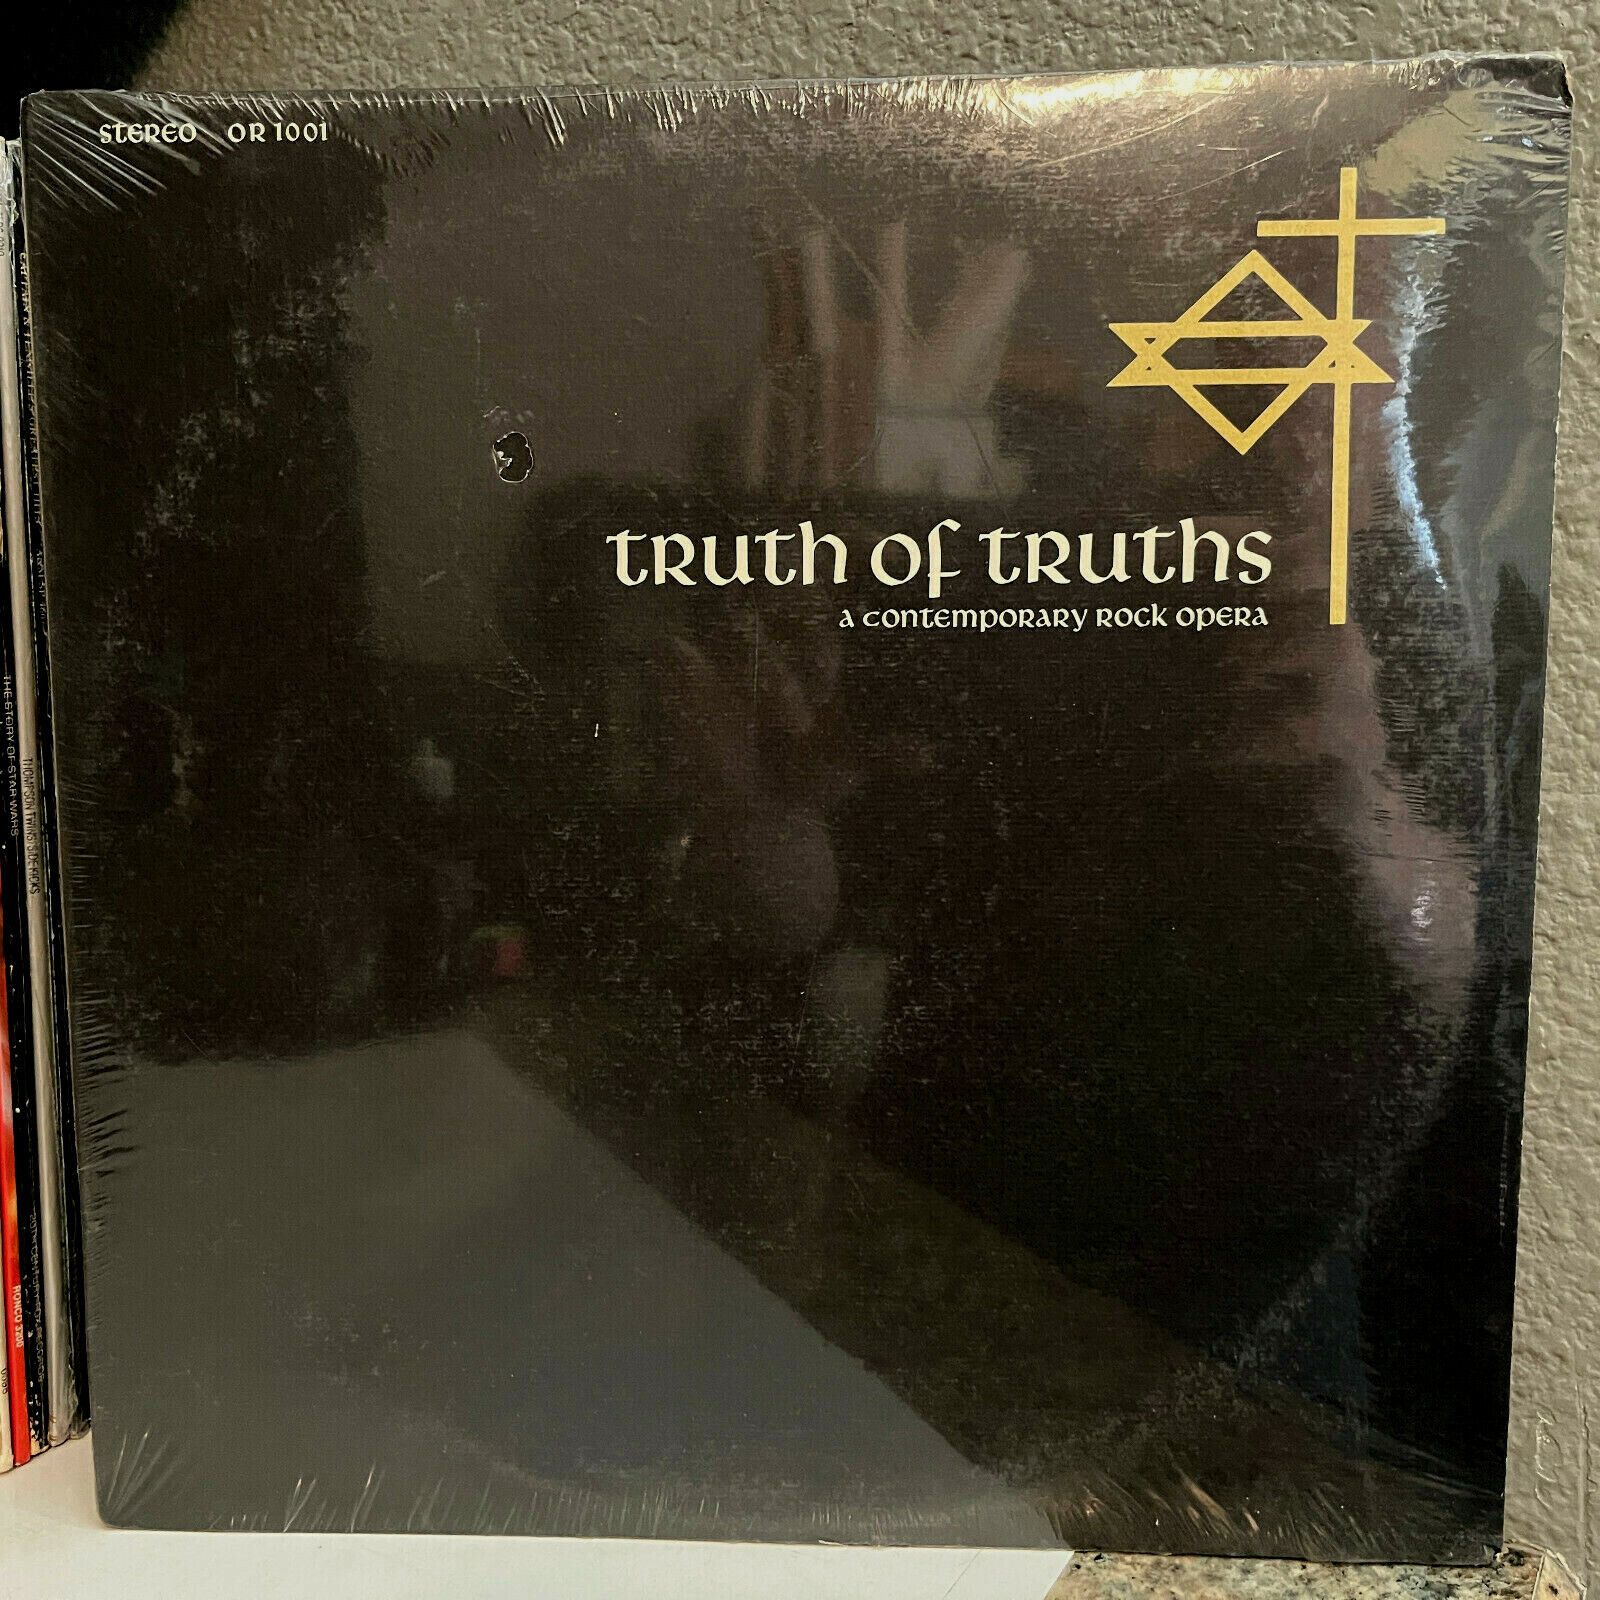 TRUTH OF TRUTHS Contemporary Rock Opera (OR 1001) - 12" Vinyl Record LP - SEALED